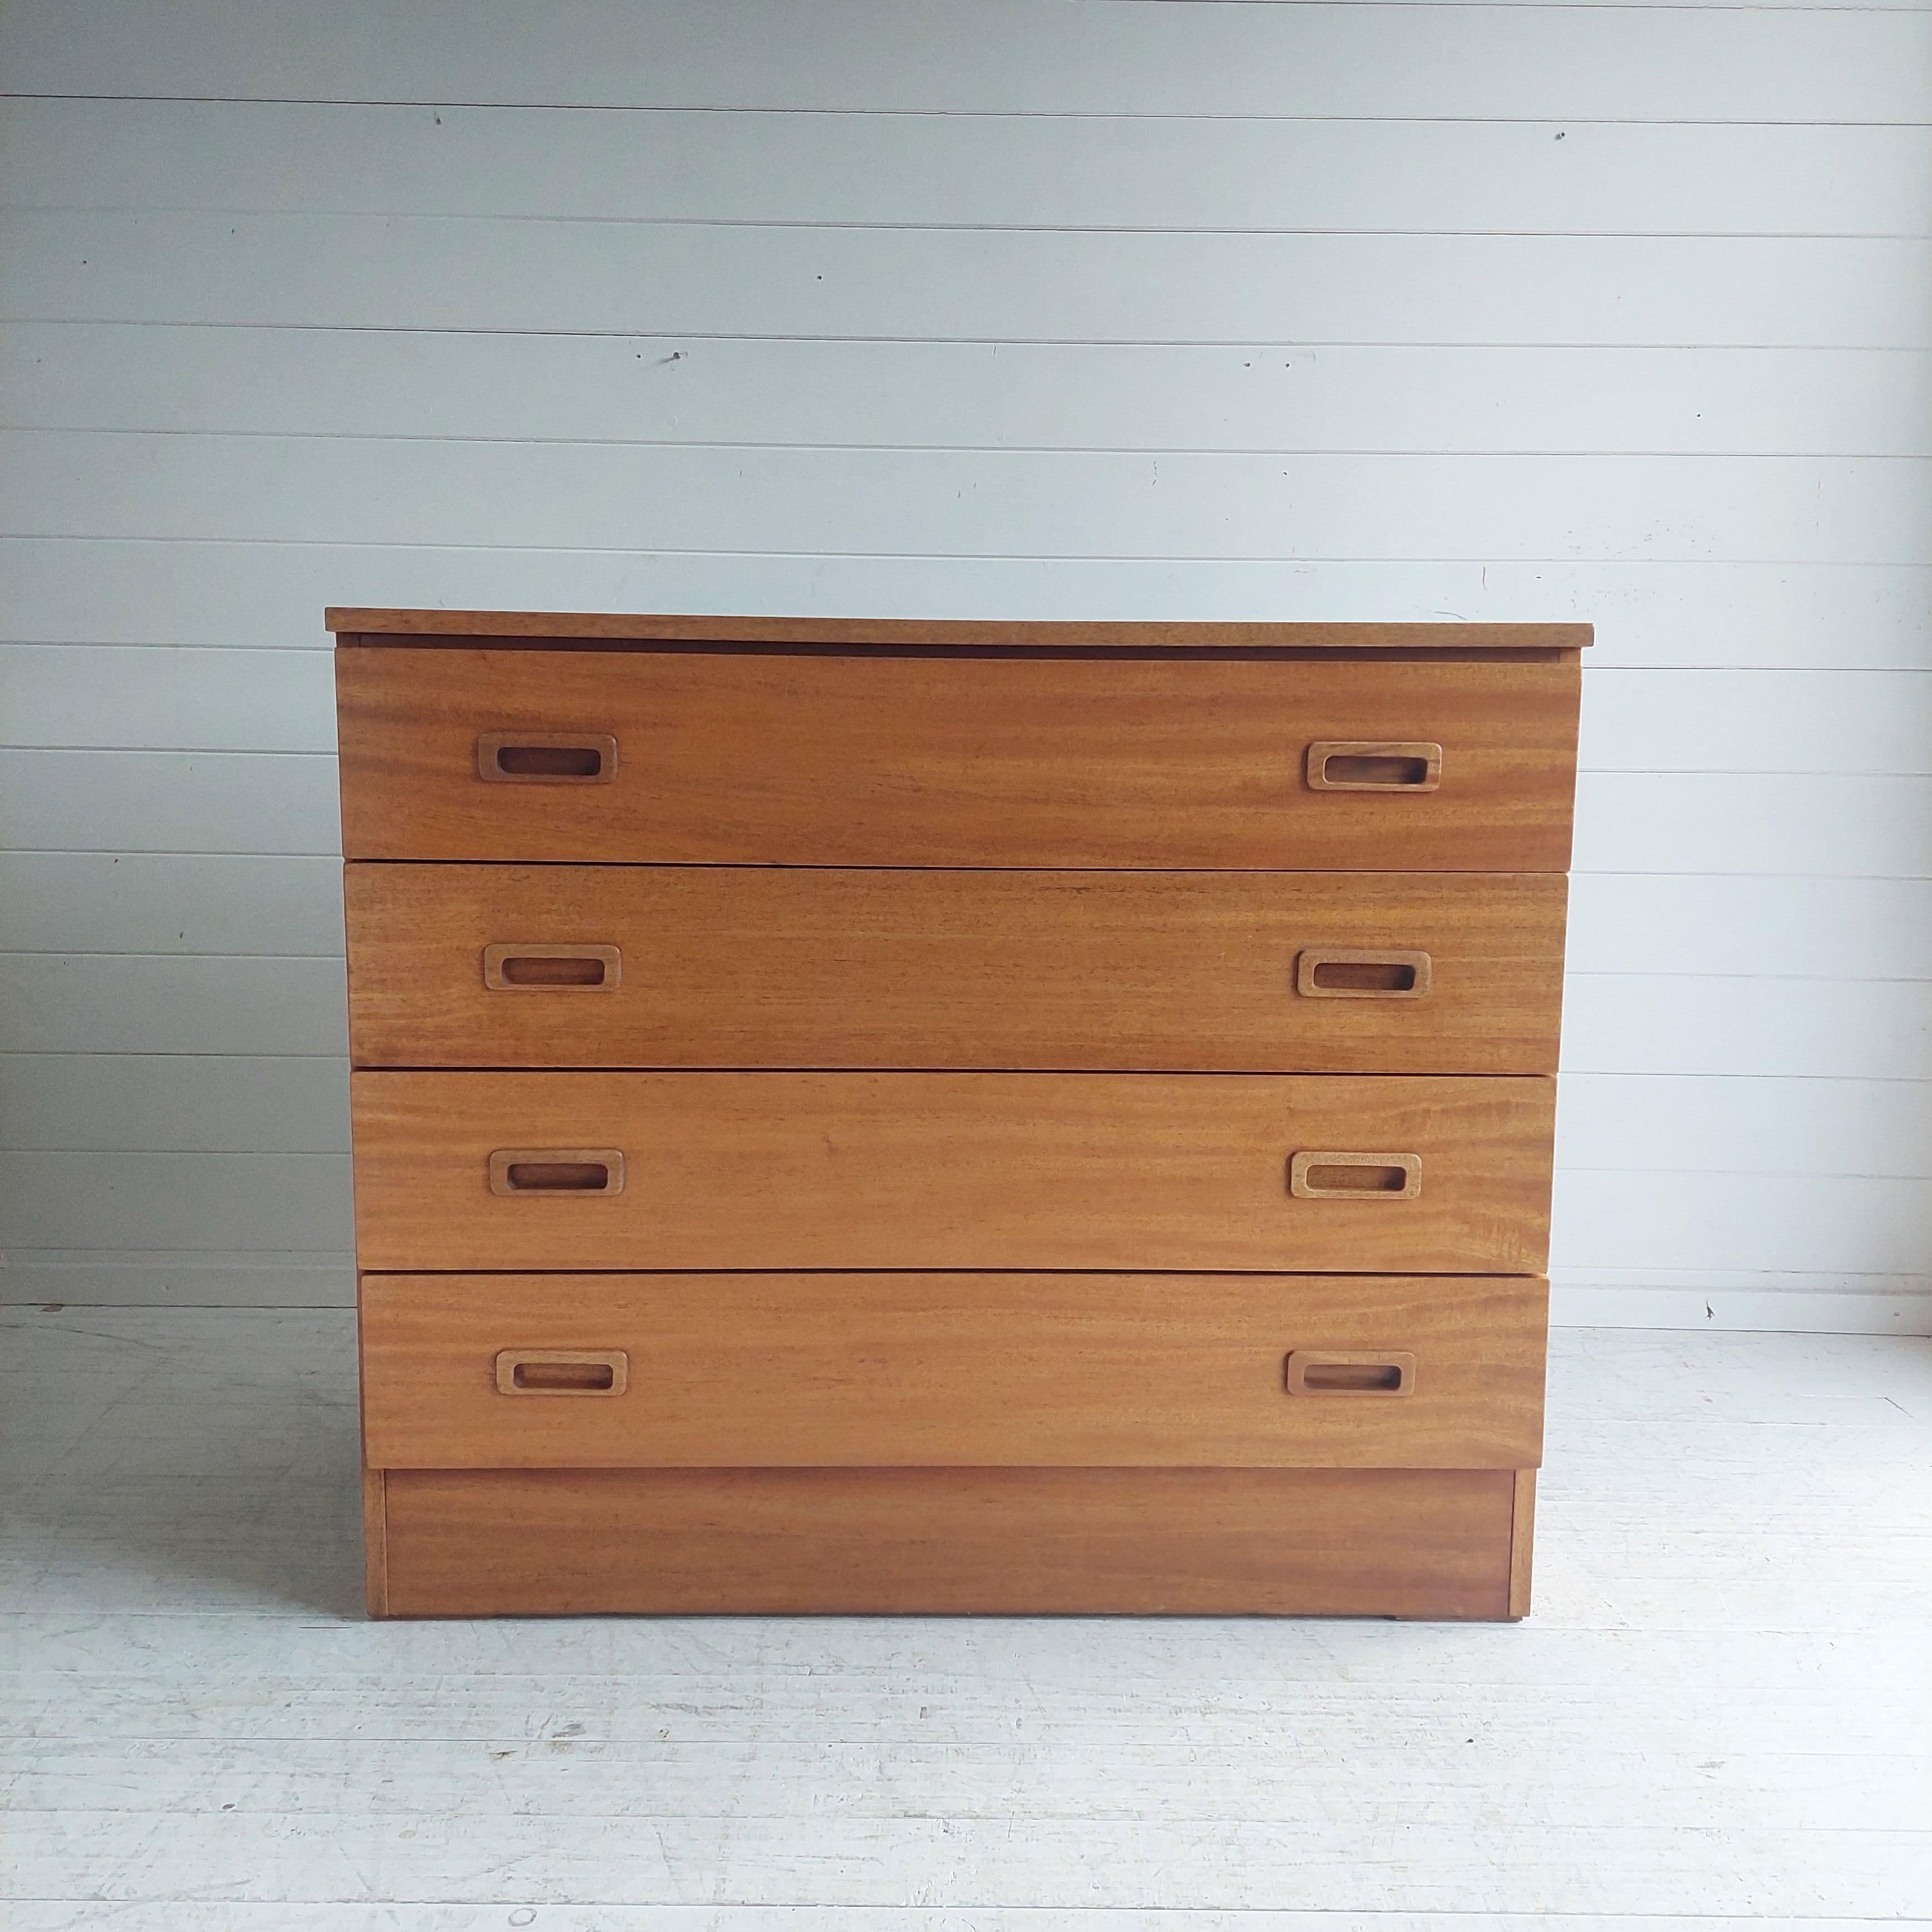 Stylish teak design chest of drawers. 
The chest of drawers comes from Denmark 
Designed in the style of Poul Hundevad. 
The cabinet has beautiful handles and 4 handy drawers and lovely gold tone.
Design Period 1960 to 1969

Mid-Century Danish